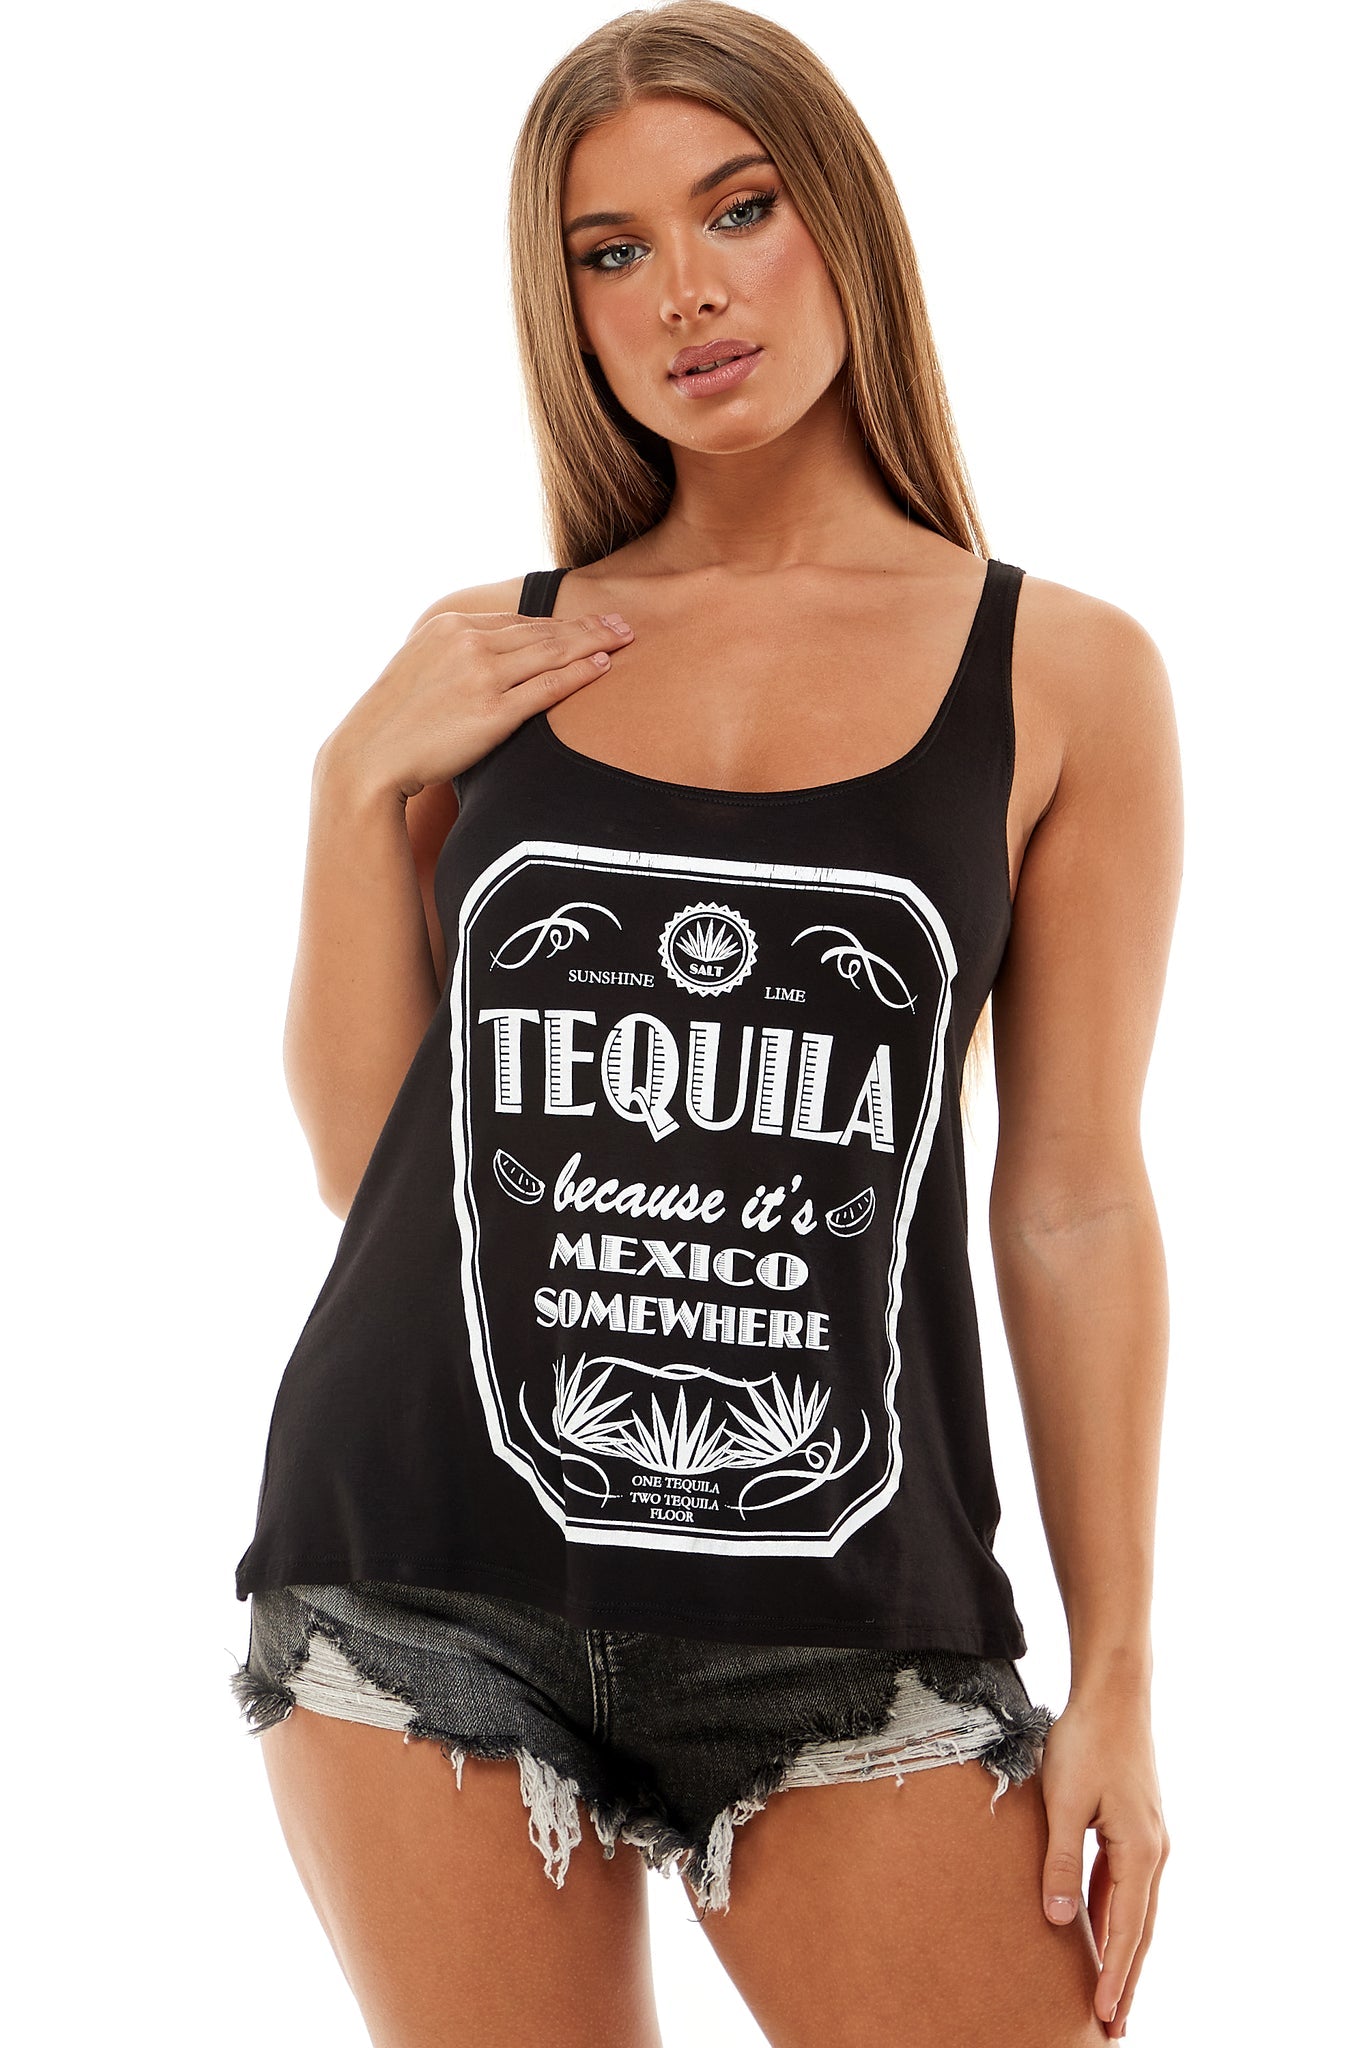 Tequila Mexico Tank - and, ATTITUDE, COUNTRY, countrystrong, COWGIRL, drinking, flag, GIRL, HOWDY, lips, love, moonshine, music, patriotic, peace, PLUS, rock, rocker, RODEO, roll, shine, SIZE, strong, SUMMER, TANK, TOP, WESTERN - Shirts & Tops - Baha Ranch Western Wear